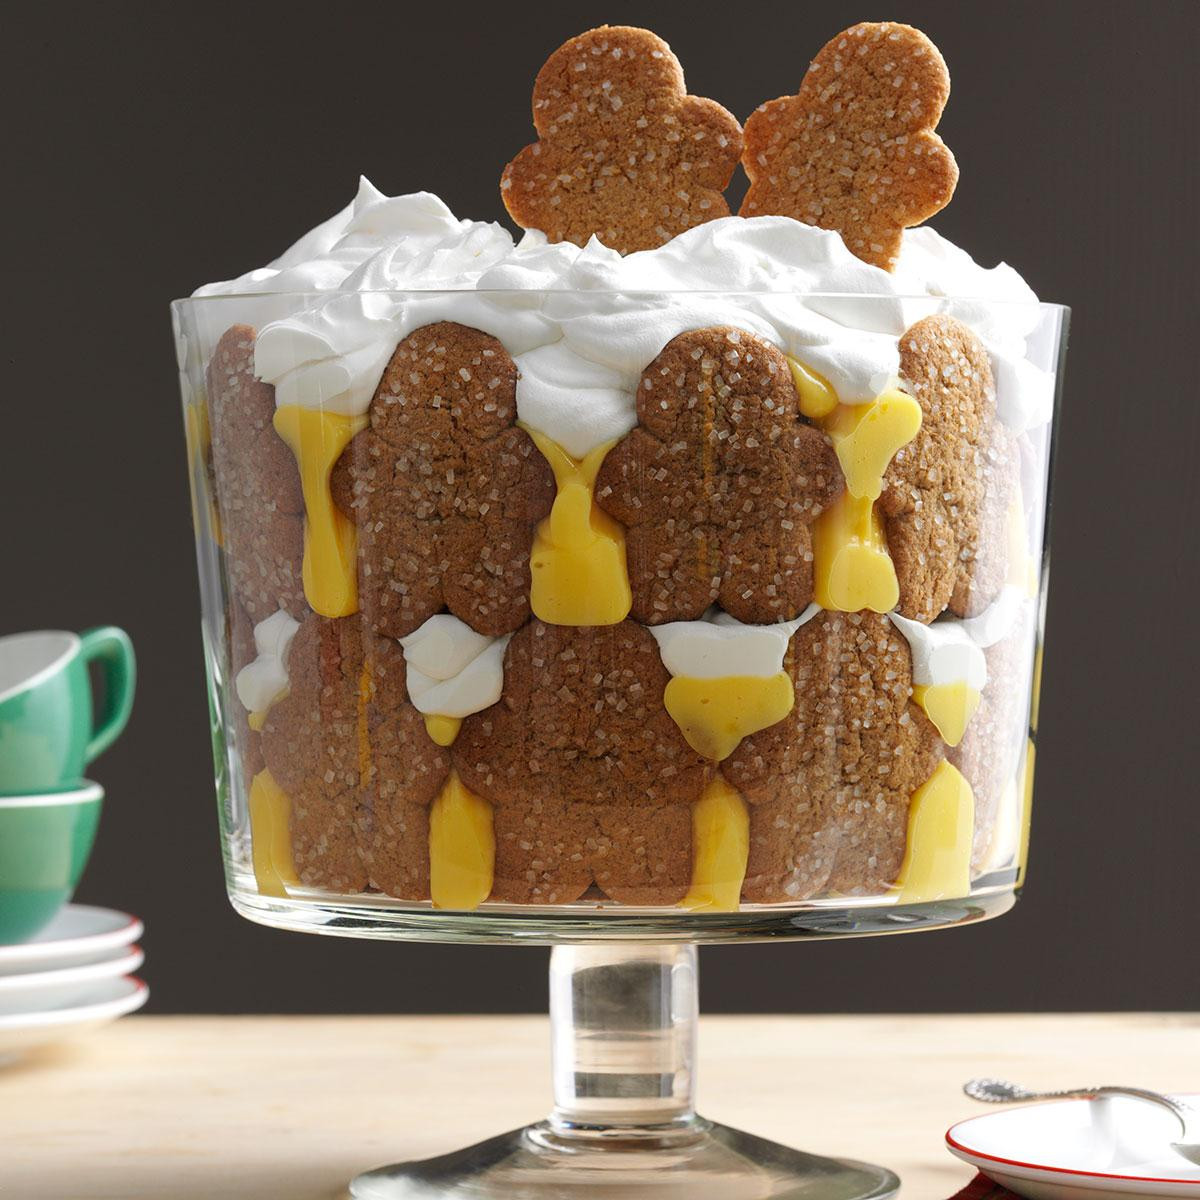 Taste Of Home Christmas Desserts
 Christmas Gingerbread Trifle Recipe